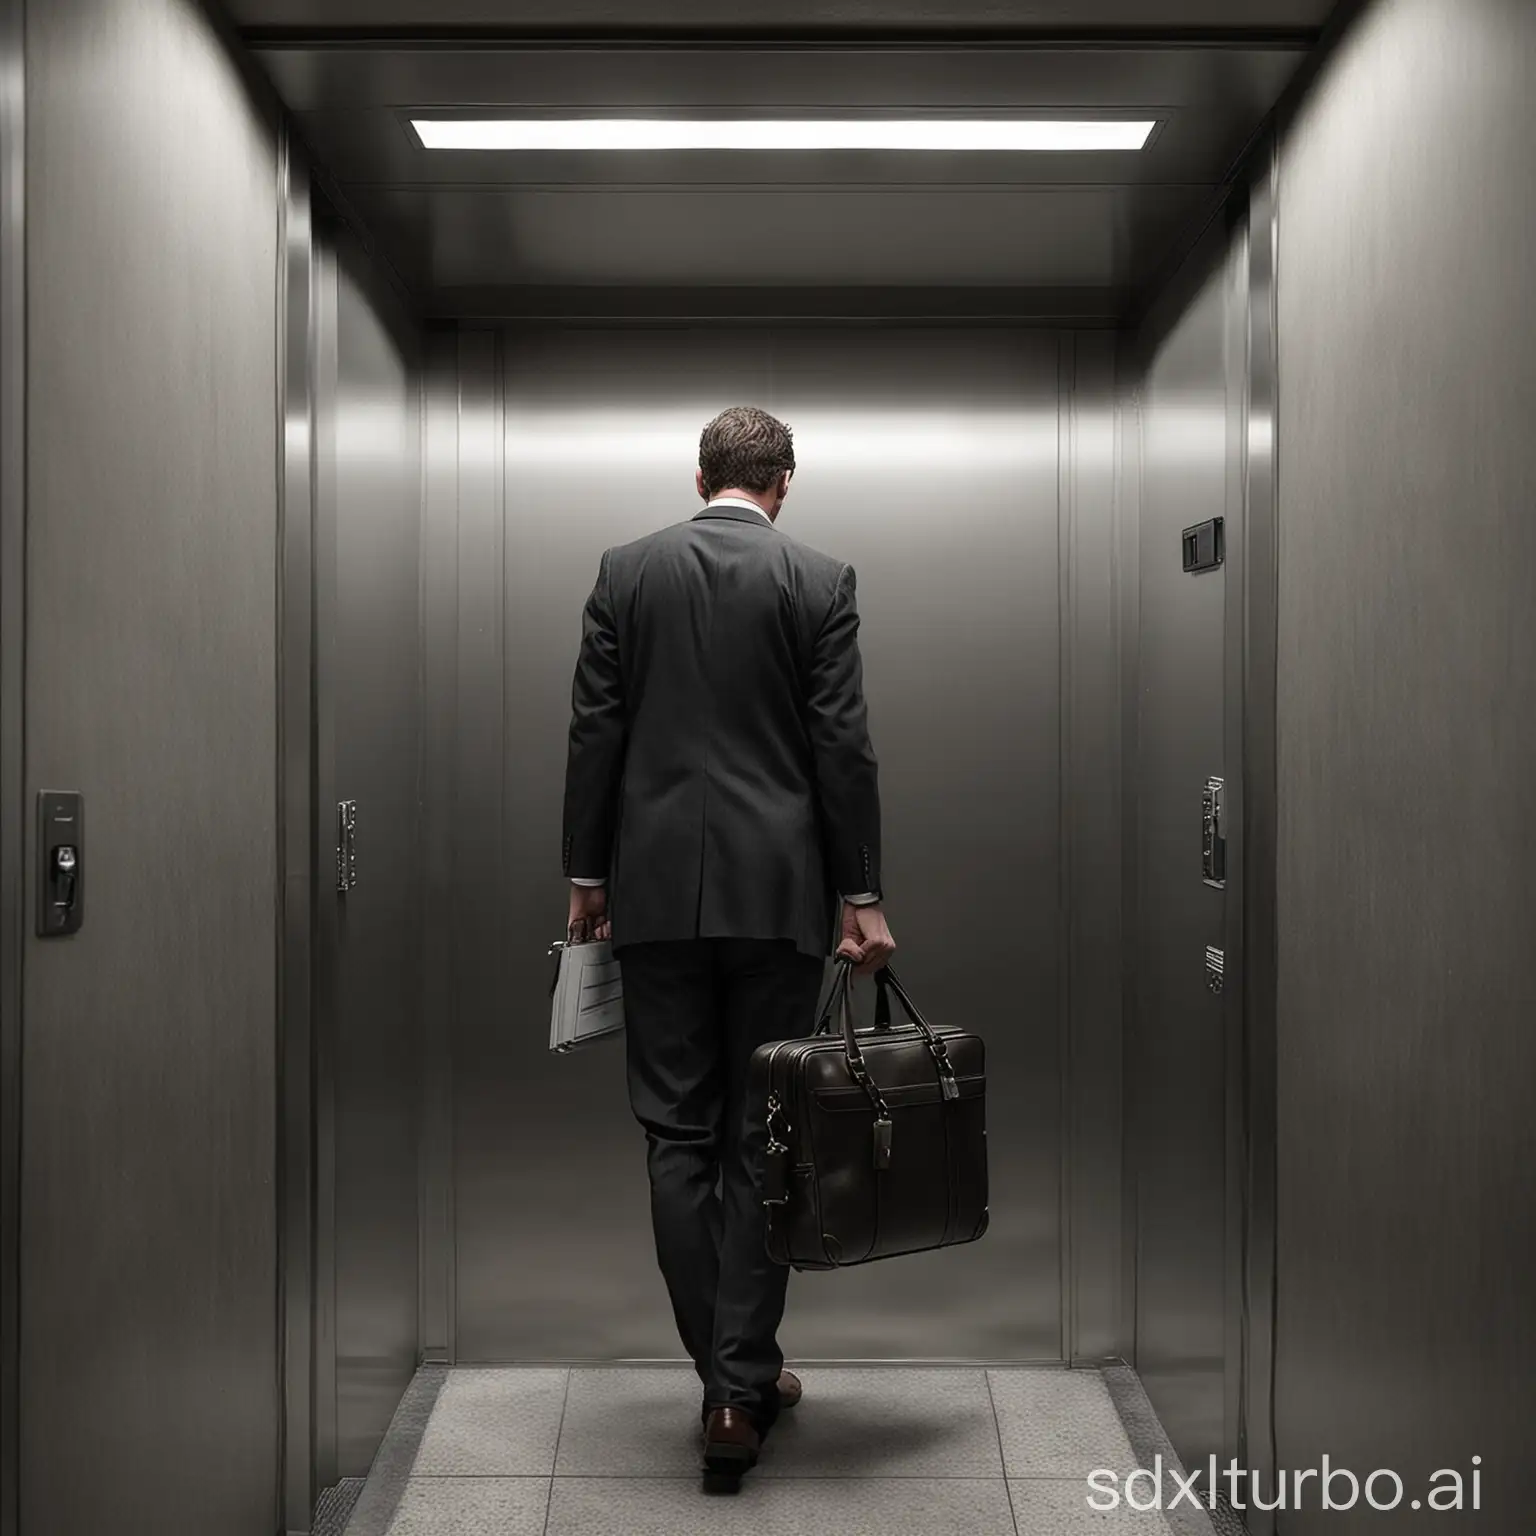 A man in an elevator with briefcase